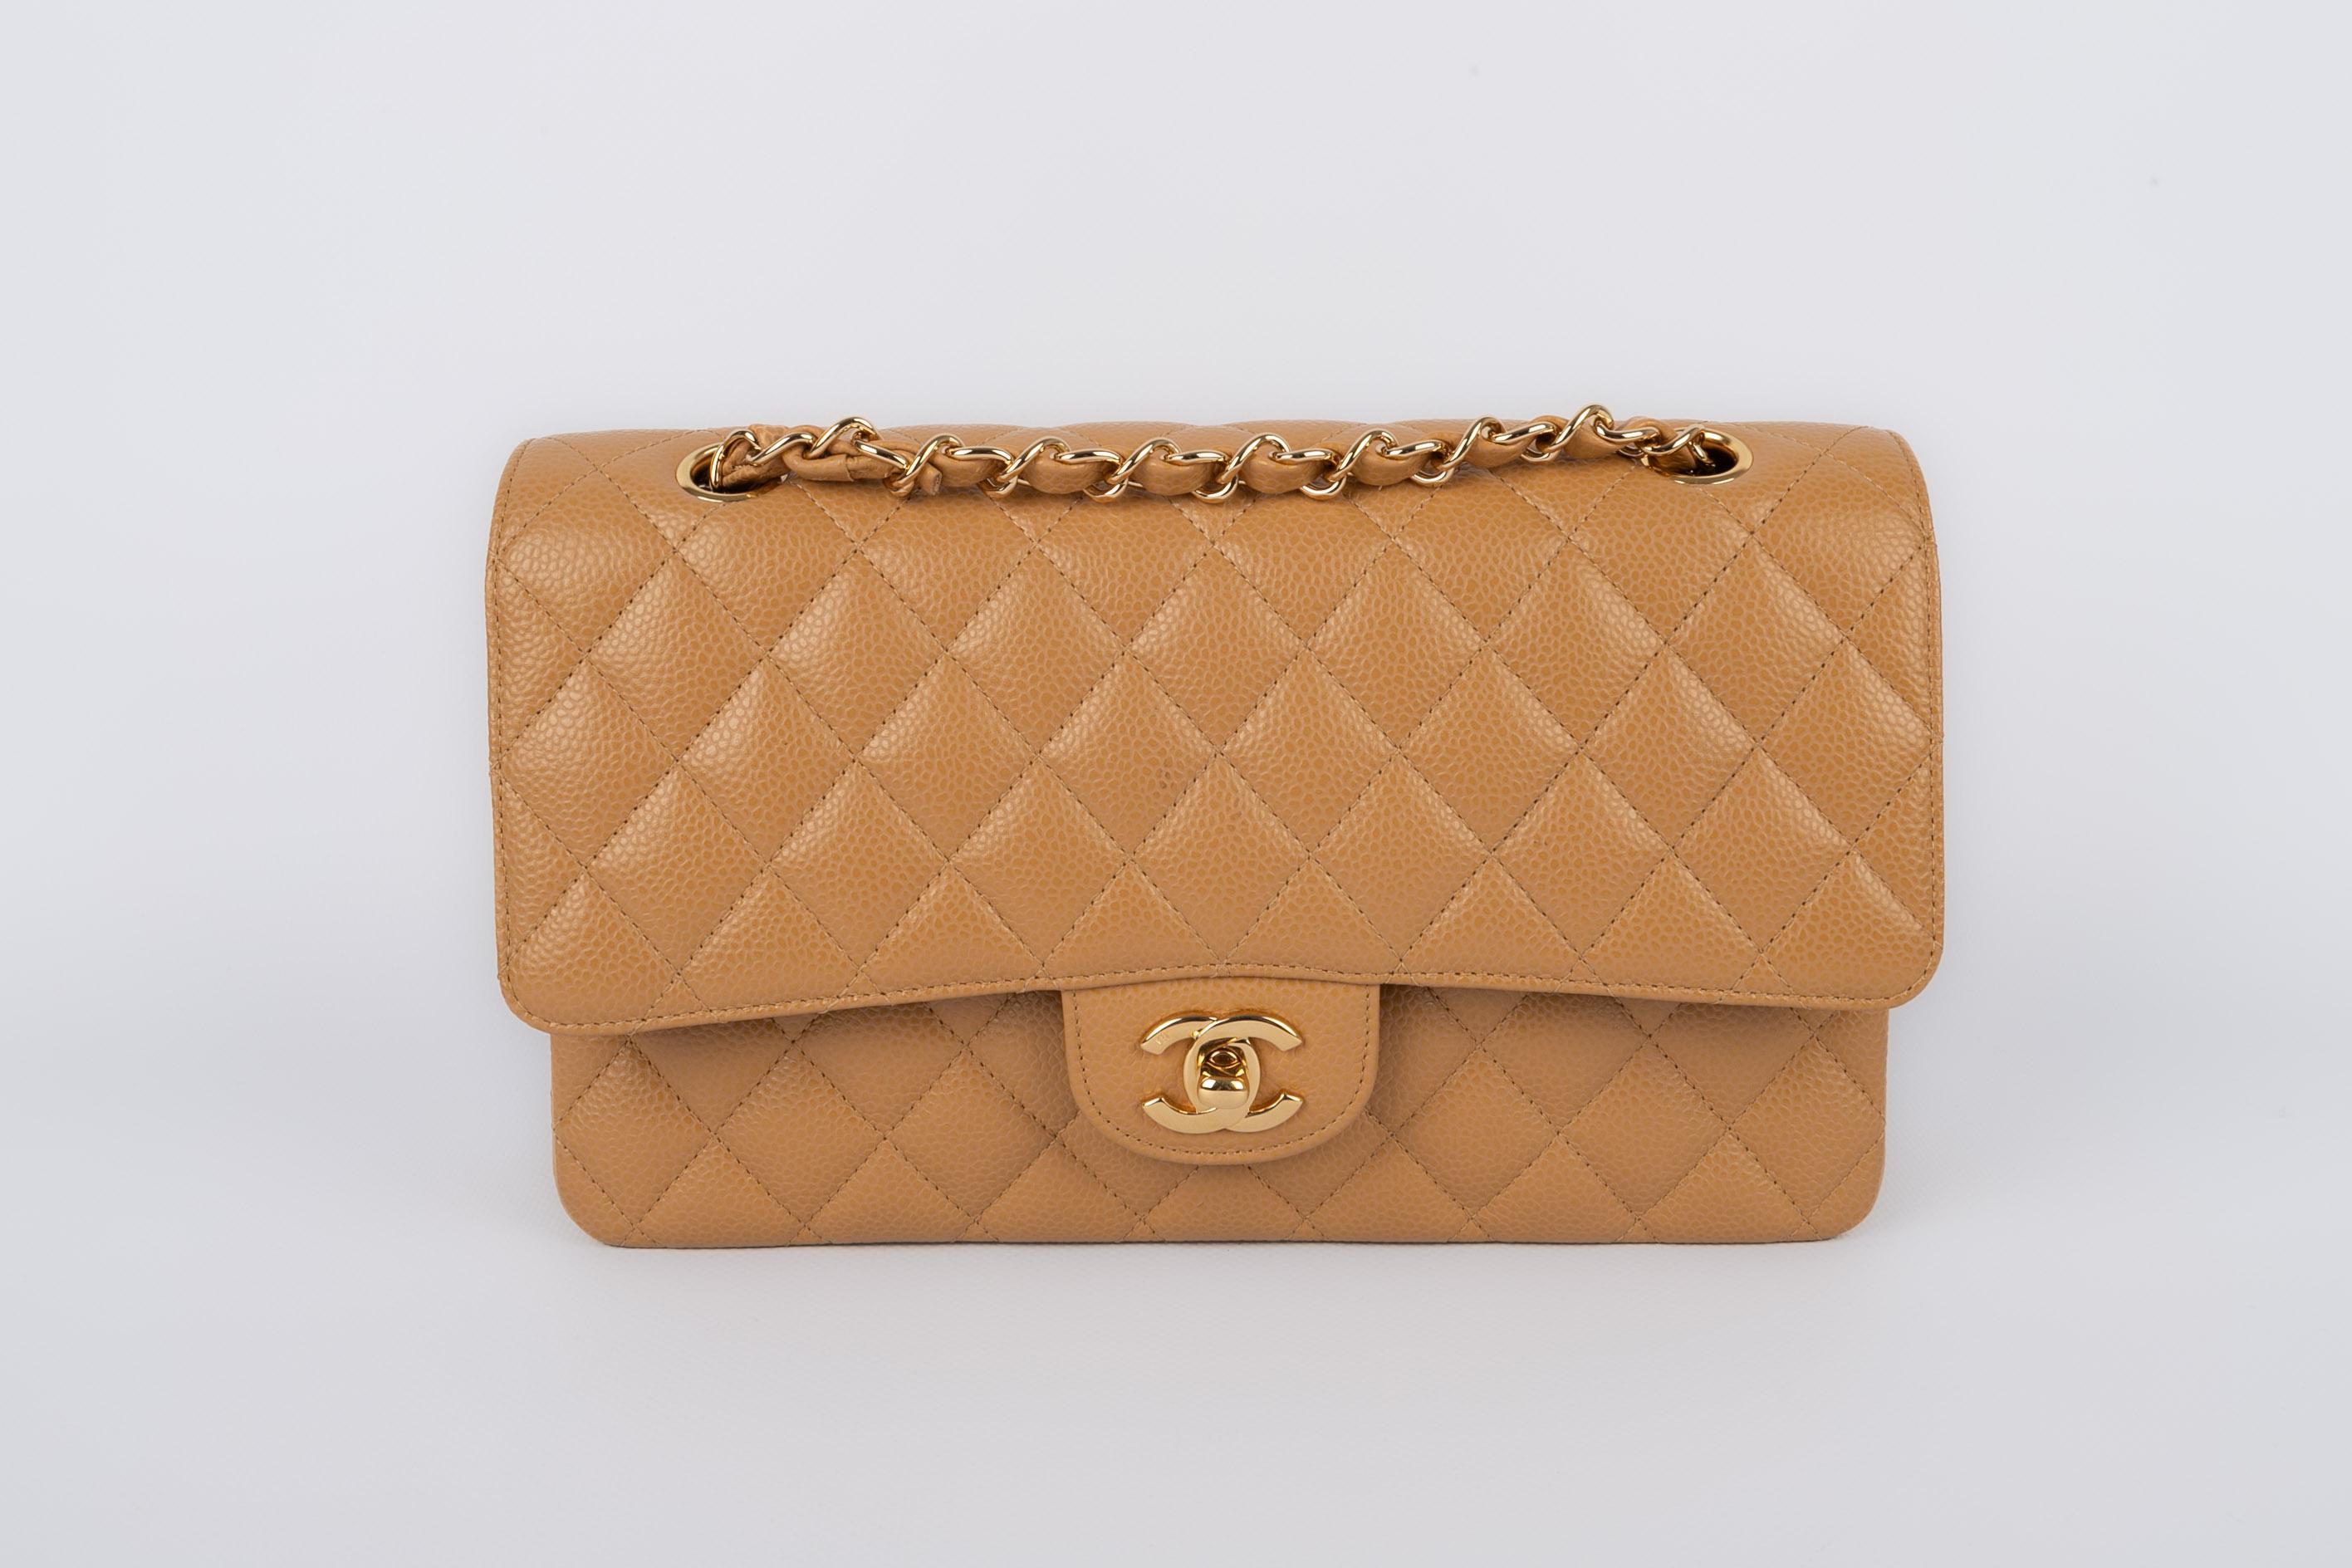 CHANEL - (Made in France) Camel quilted grain leather Timeless bag with golden metal elements. Bag with a serial number. 2006/2008 Collection.

Condition:
Very good condition

Dimensions:
Length: 25 cm - Height: 16 cm - Depth: 6 cm - Handle length: